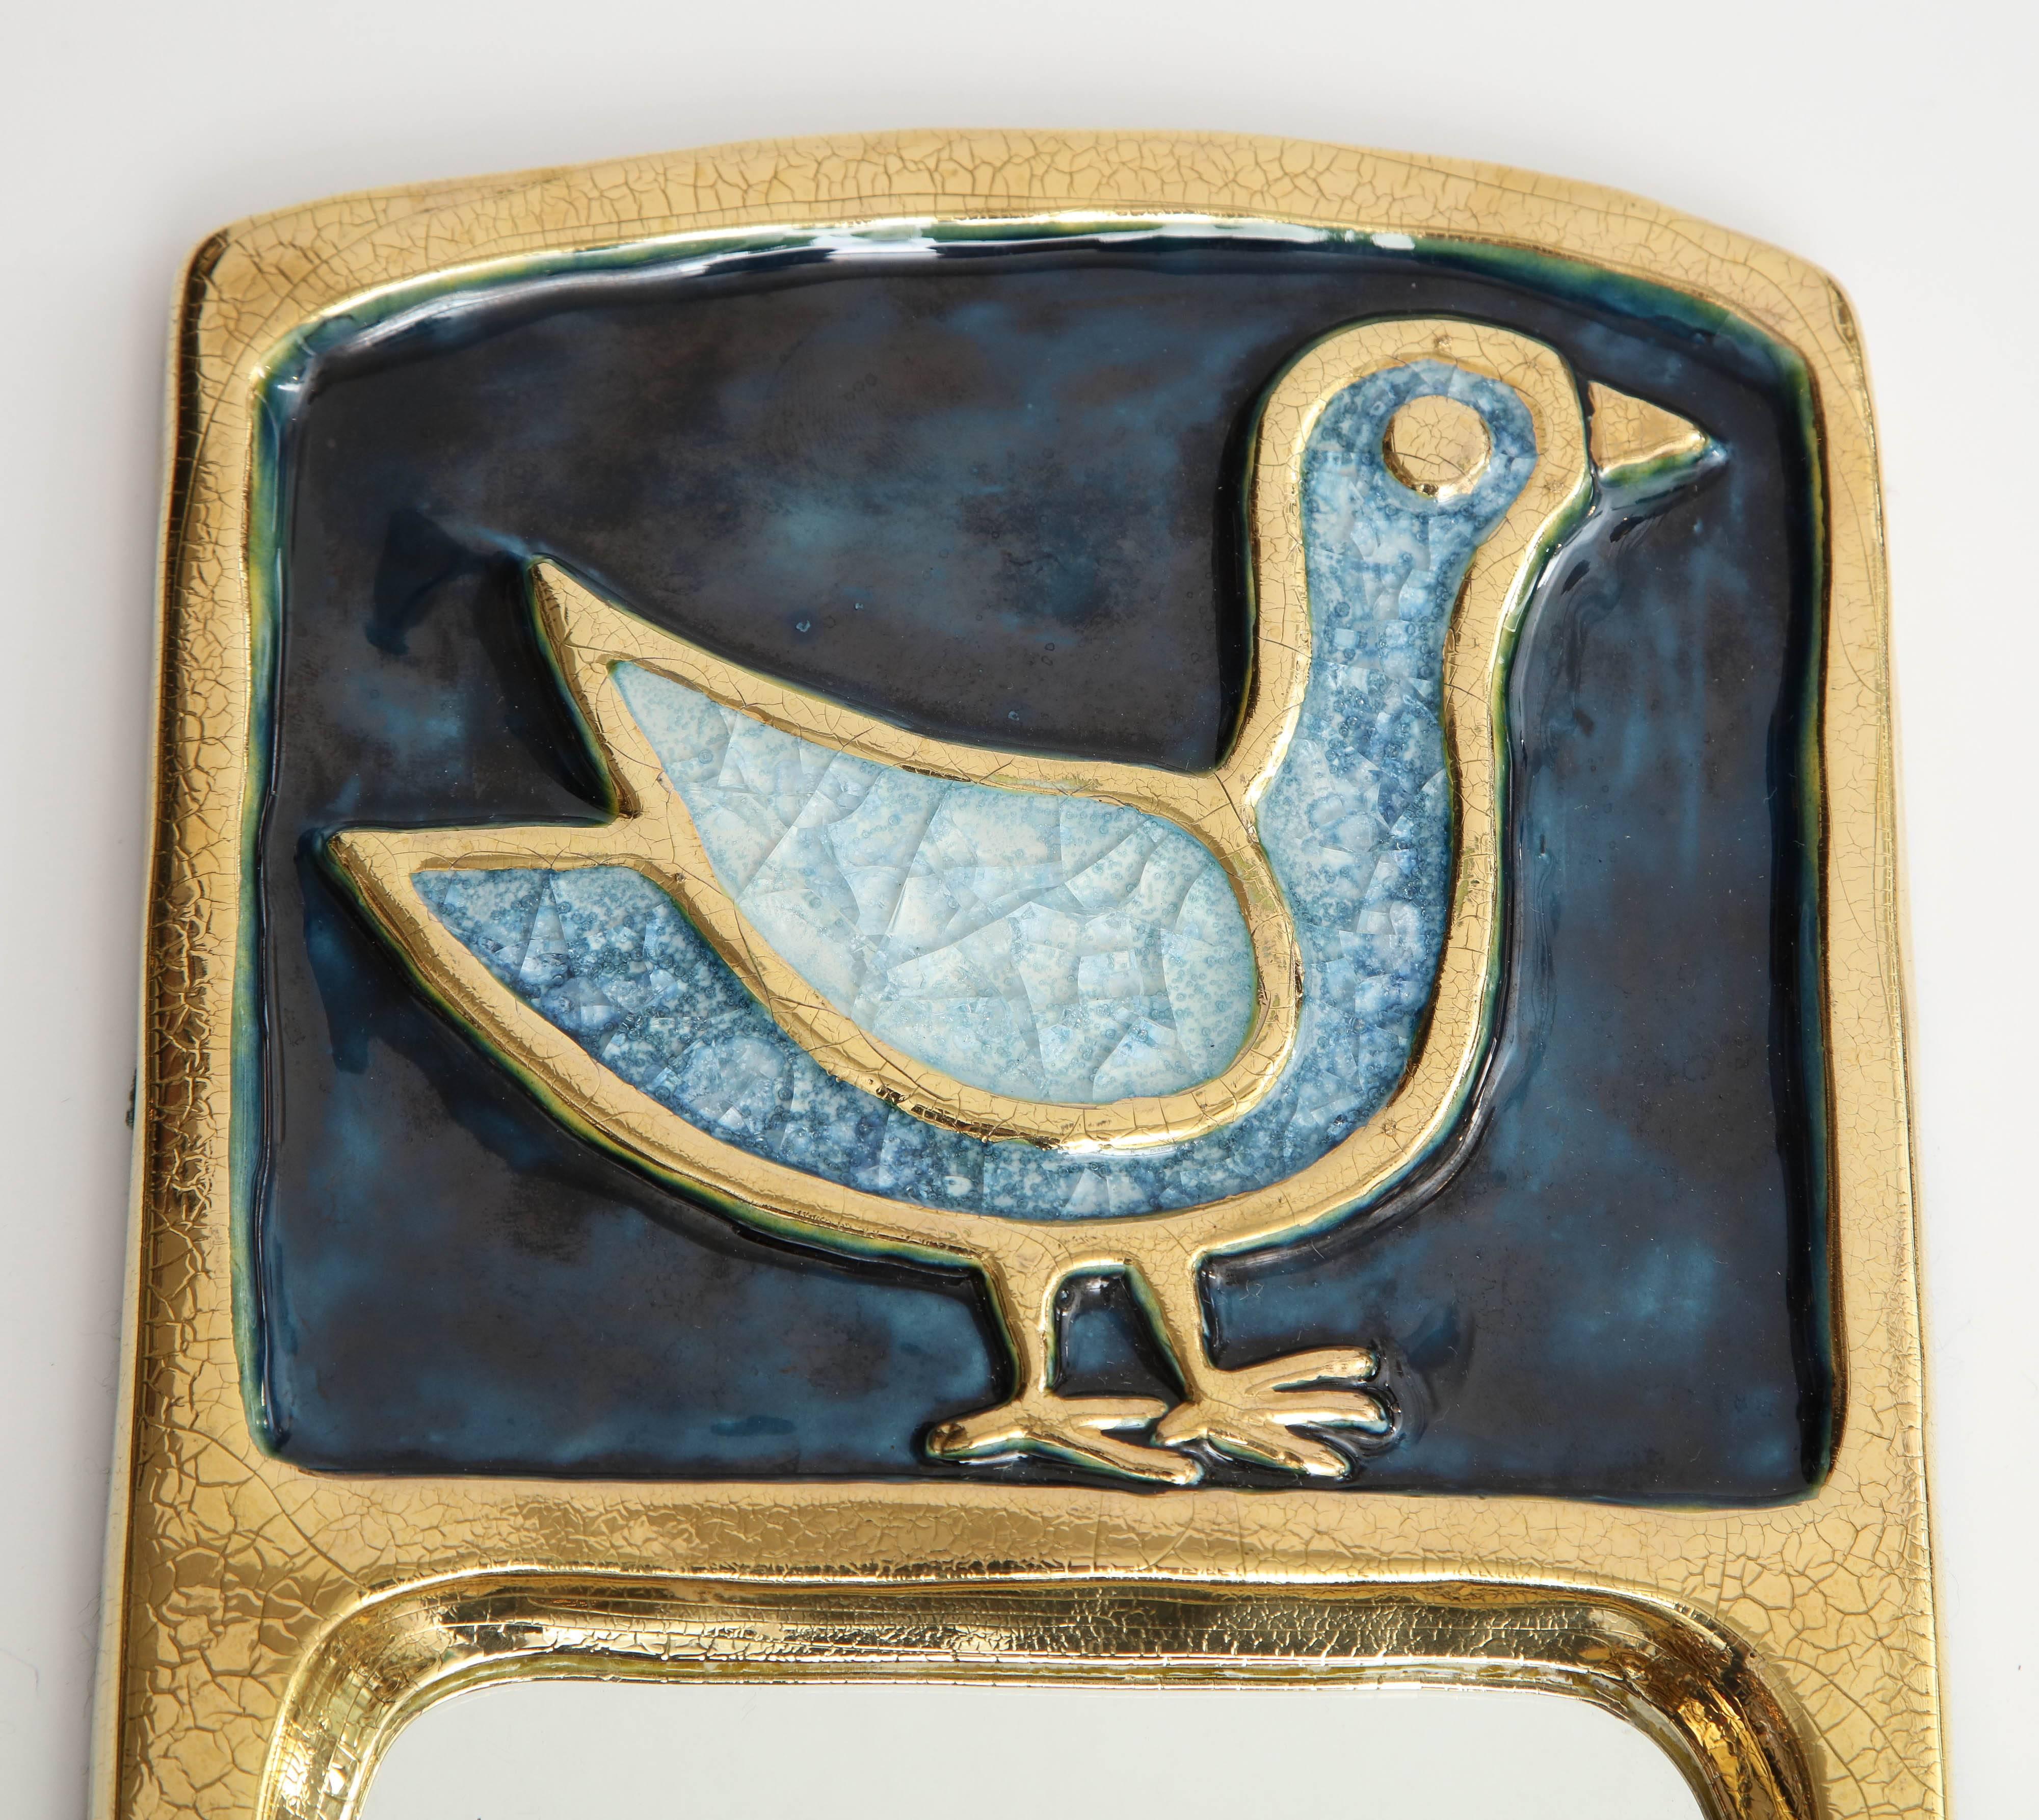 Inspired by Russian icons, artist Francois Lembo's creations are unique and beautiful.  This charming mirror features a frame in a gold crackled glaze with a bird in a blue stone in a stunning blue enamel ground color. A small piece with a lot of